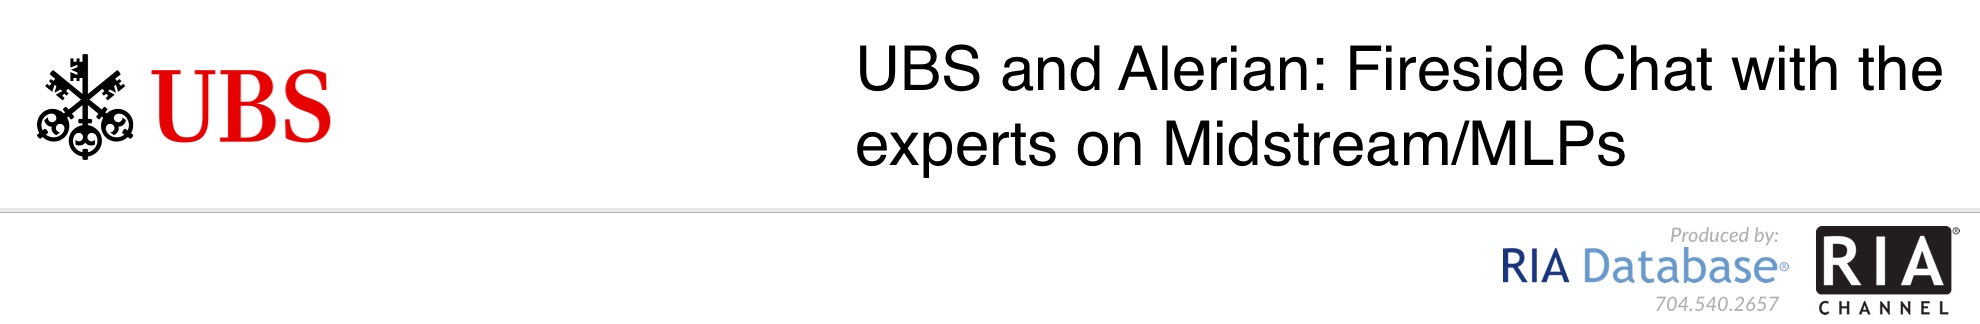 UBS and Alerian: Fireside Chat with the experts on Midstream/MLPs